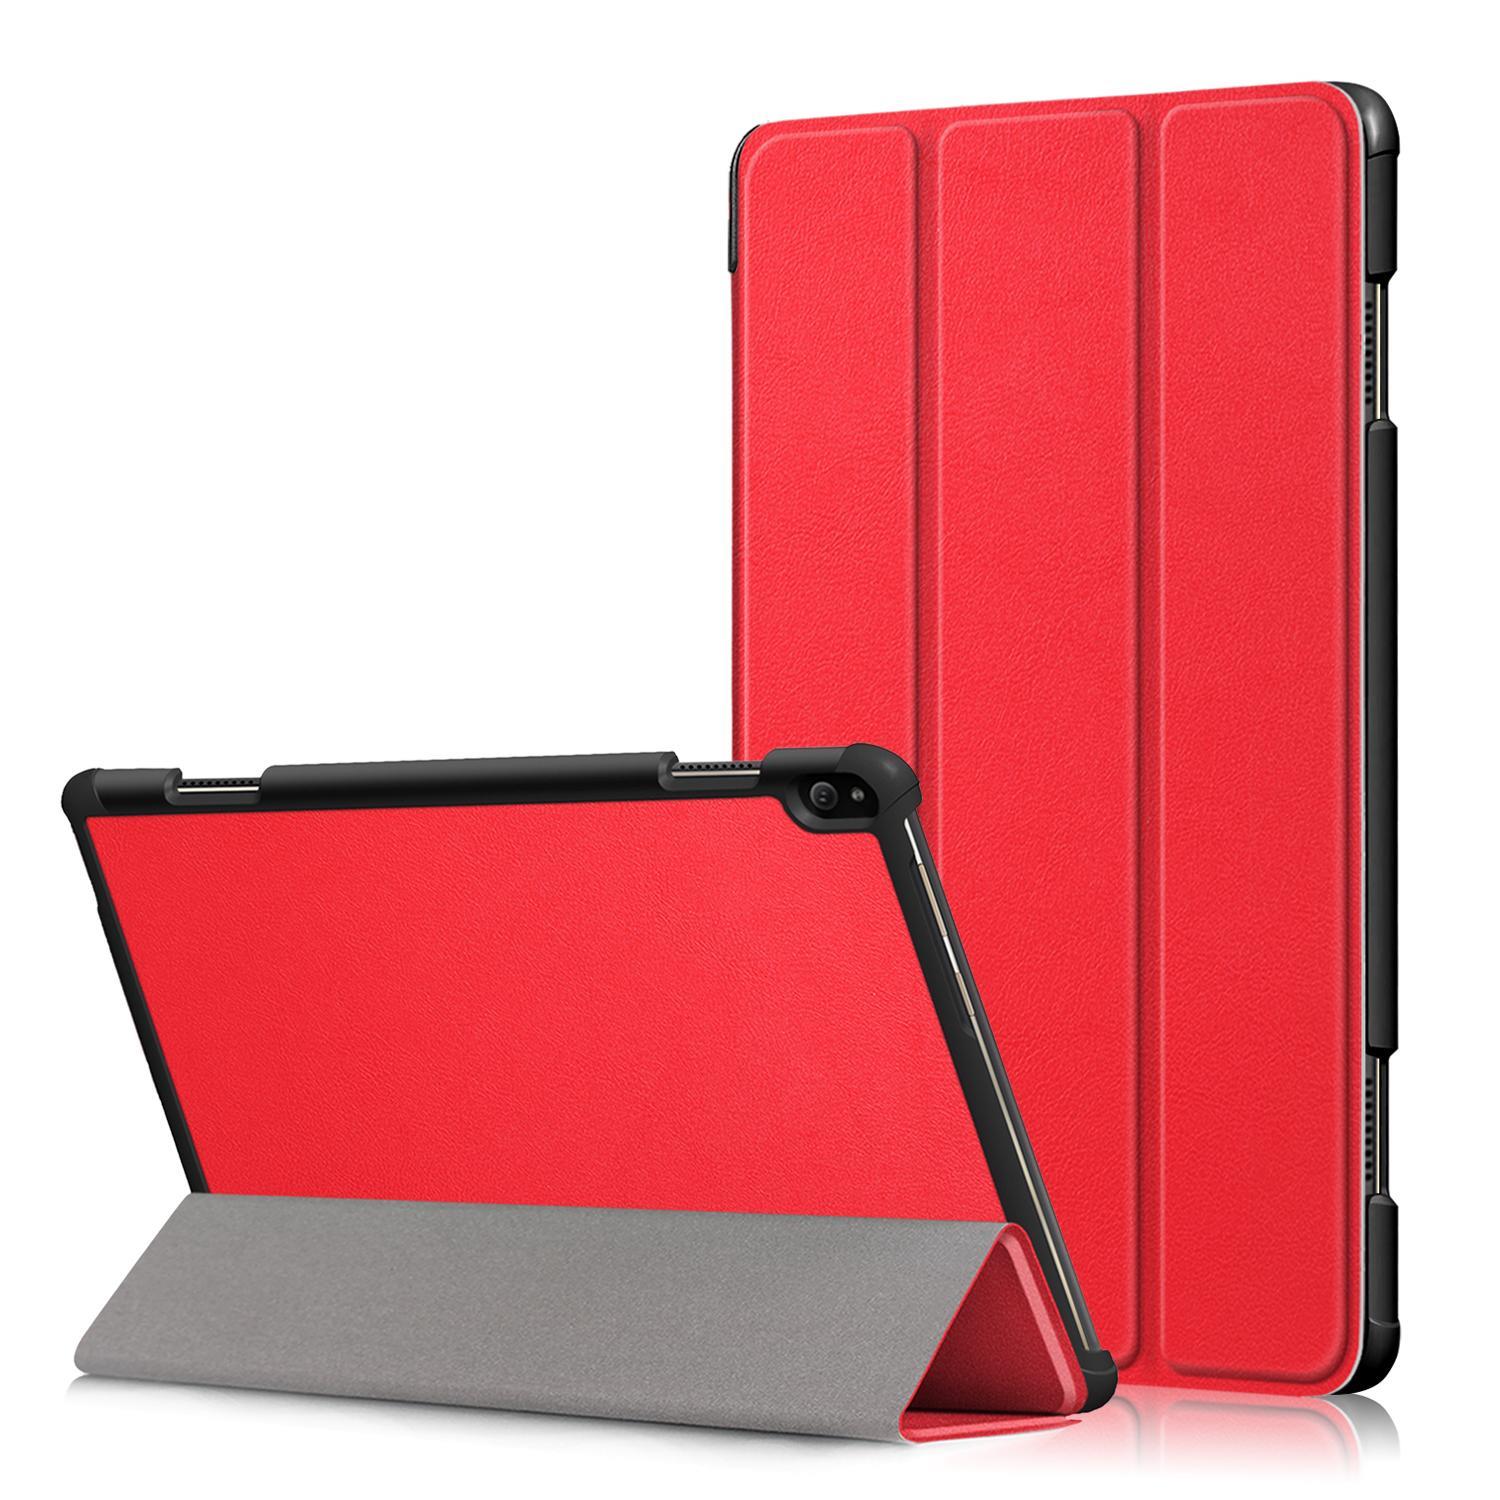 MCC For Lenovo Tab M10 2nd Gen Smart Leather Case Cover Tablet TB-X306 10" [Red]